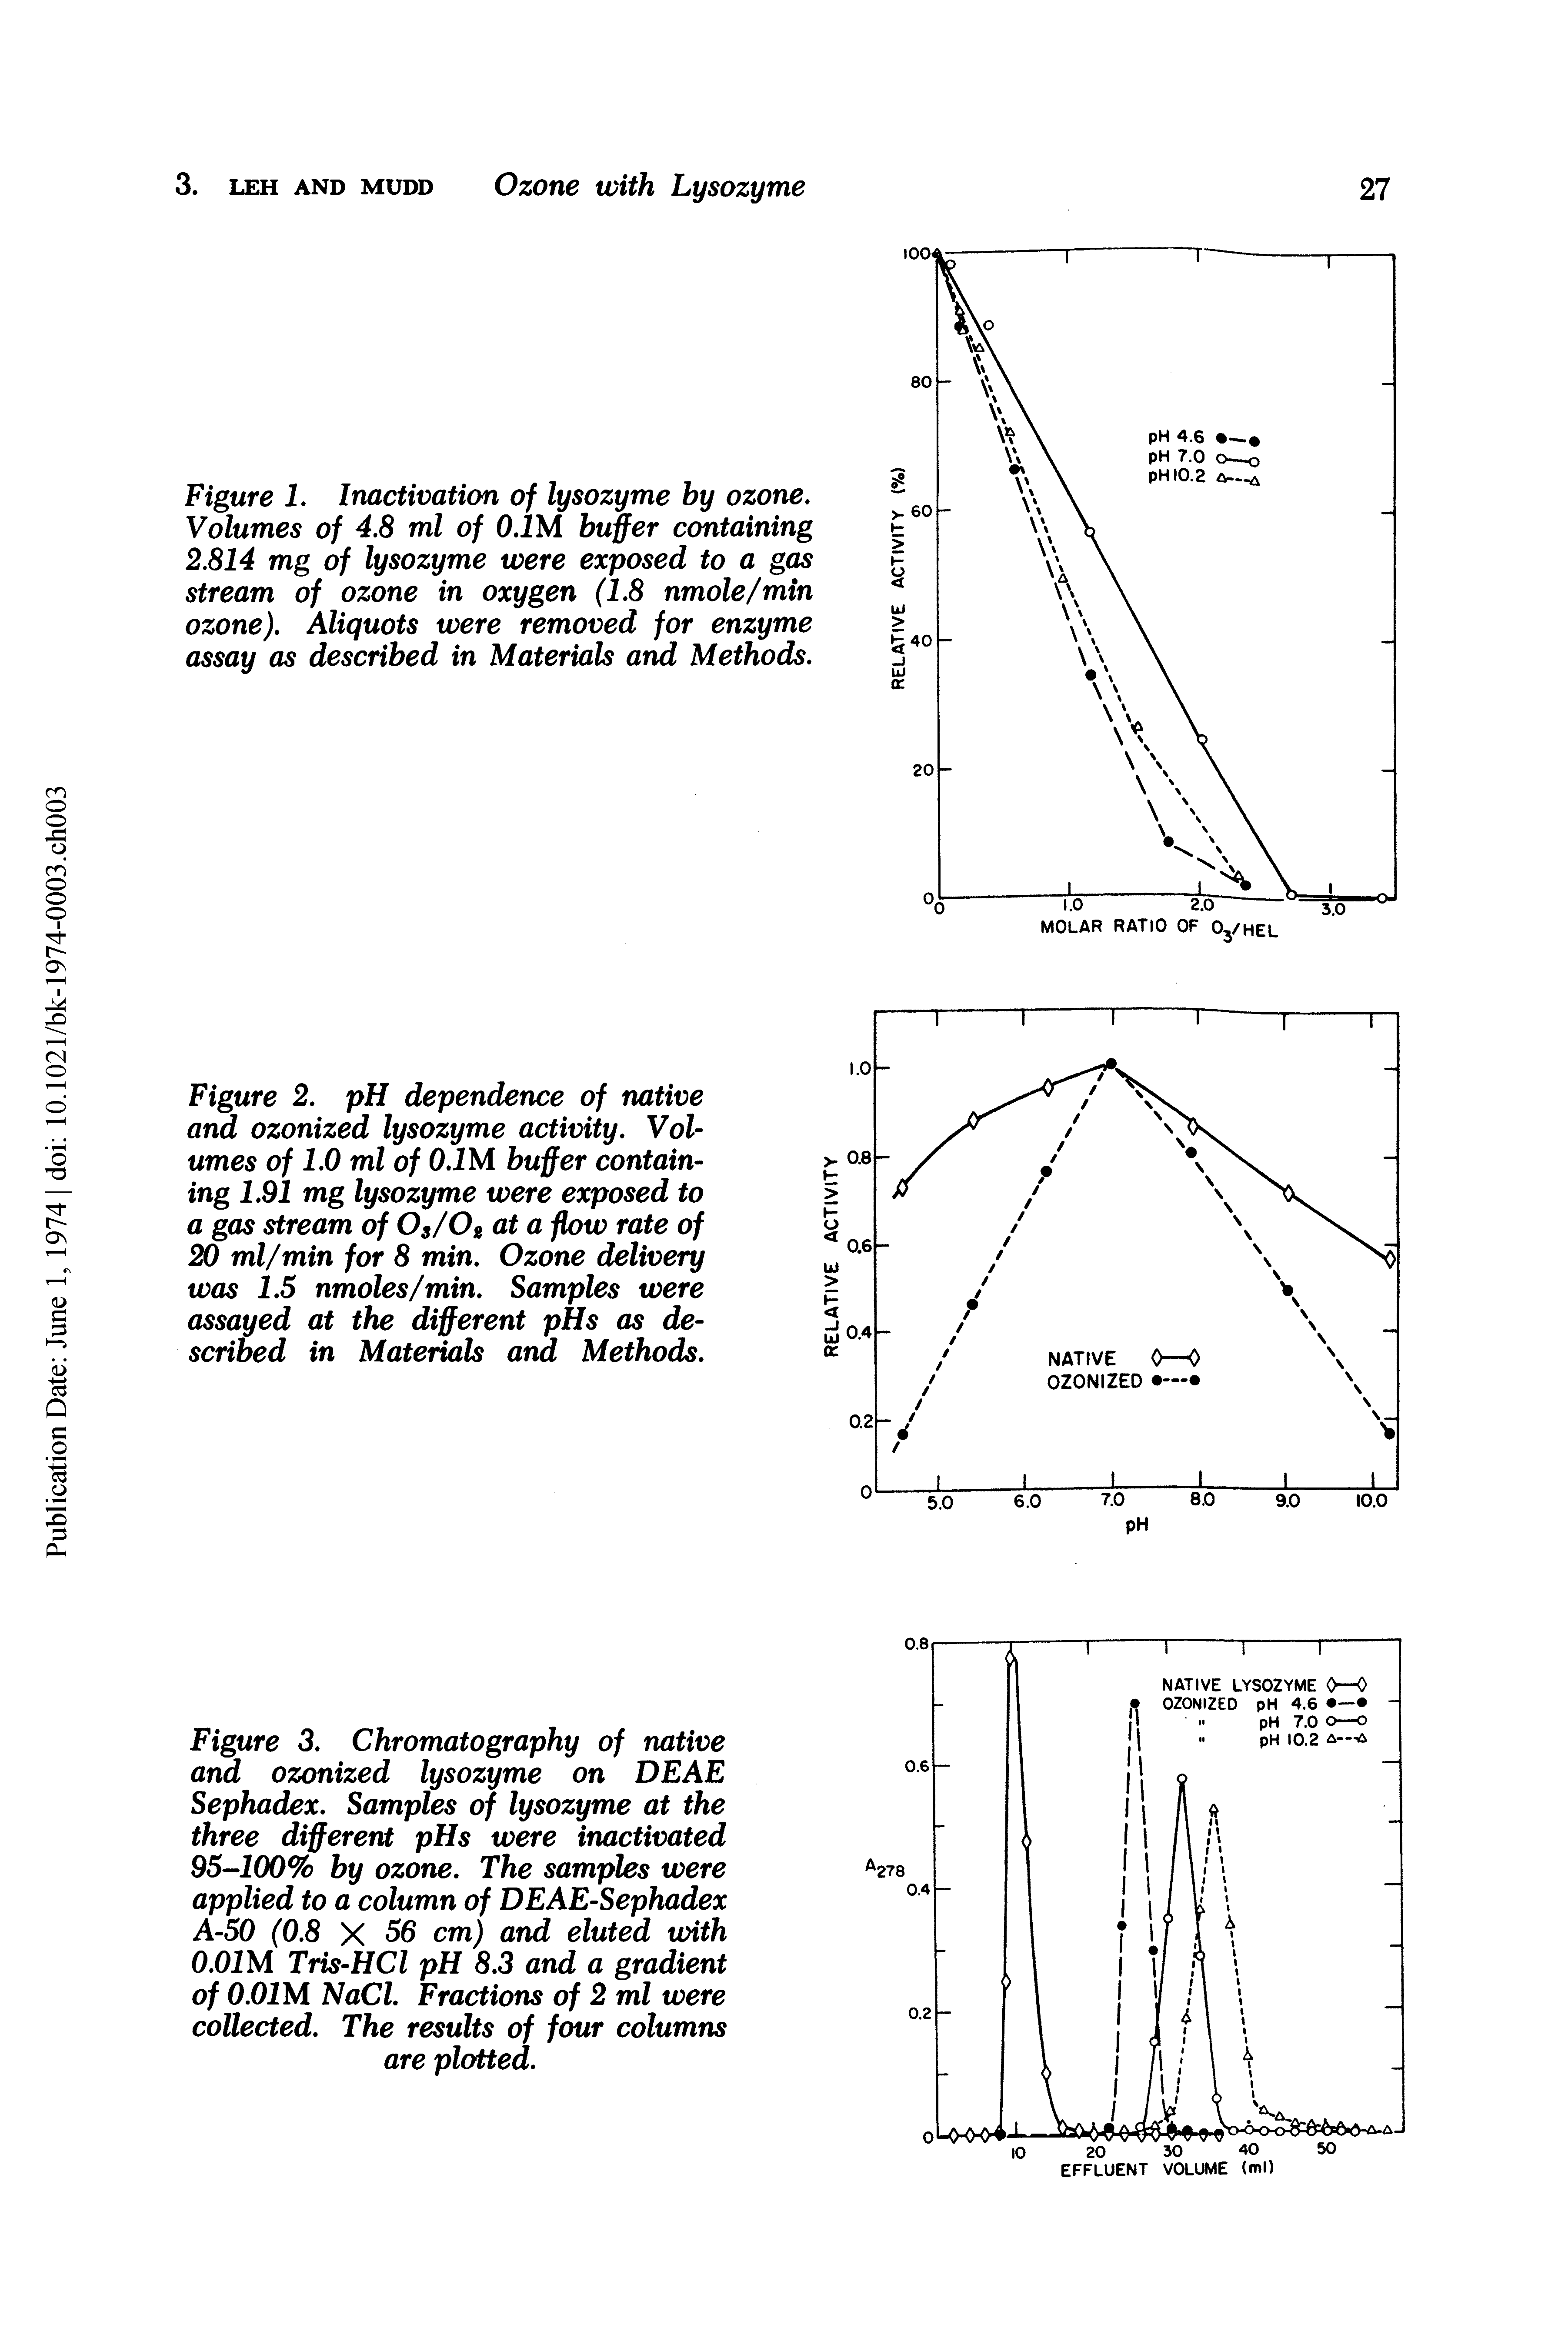 Figure 3. Chromatography of native and ozonized lysozyme on DEAE Sephadex. Samples of lysozyme at the three different pHs were inactivated 95-100% by ozone. The samples were applied to a column of DEAE-Sephadex A-50 (0.8 X 56 cm) and eluted with O.OIM Tris-HCl pH 8.3 and a gradient of O.OIM NaCl. Fractions of 2 ml were collected. The results of four columns are plotted.